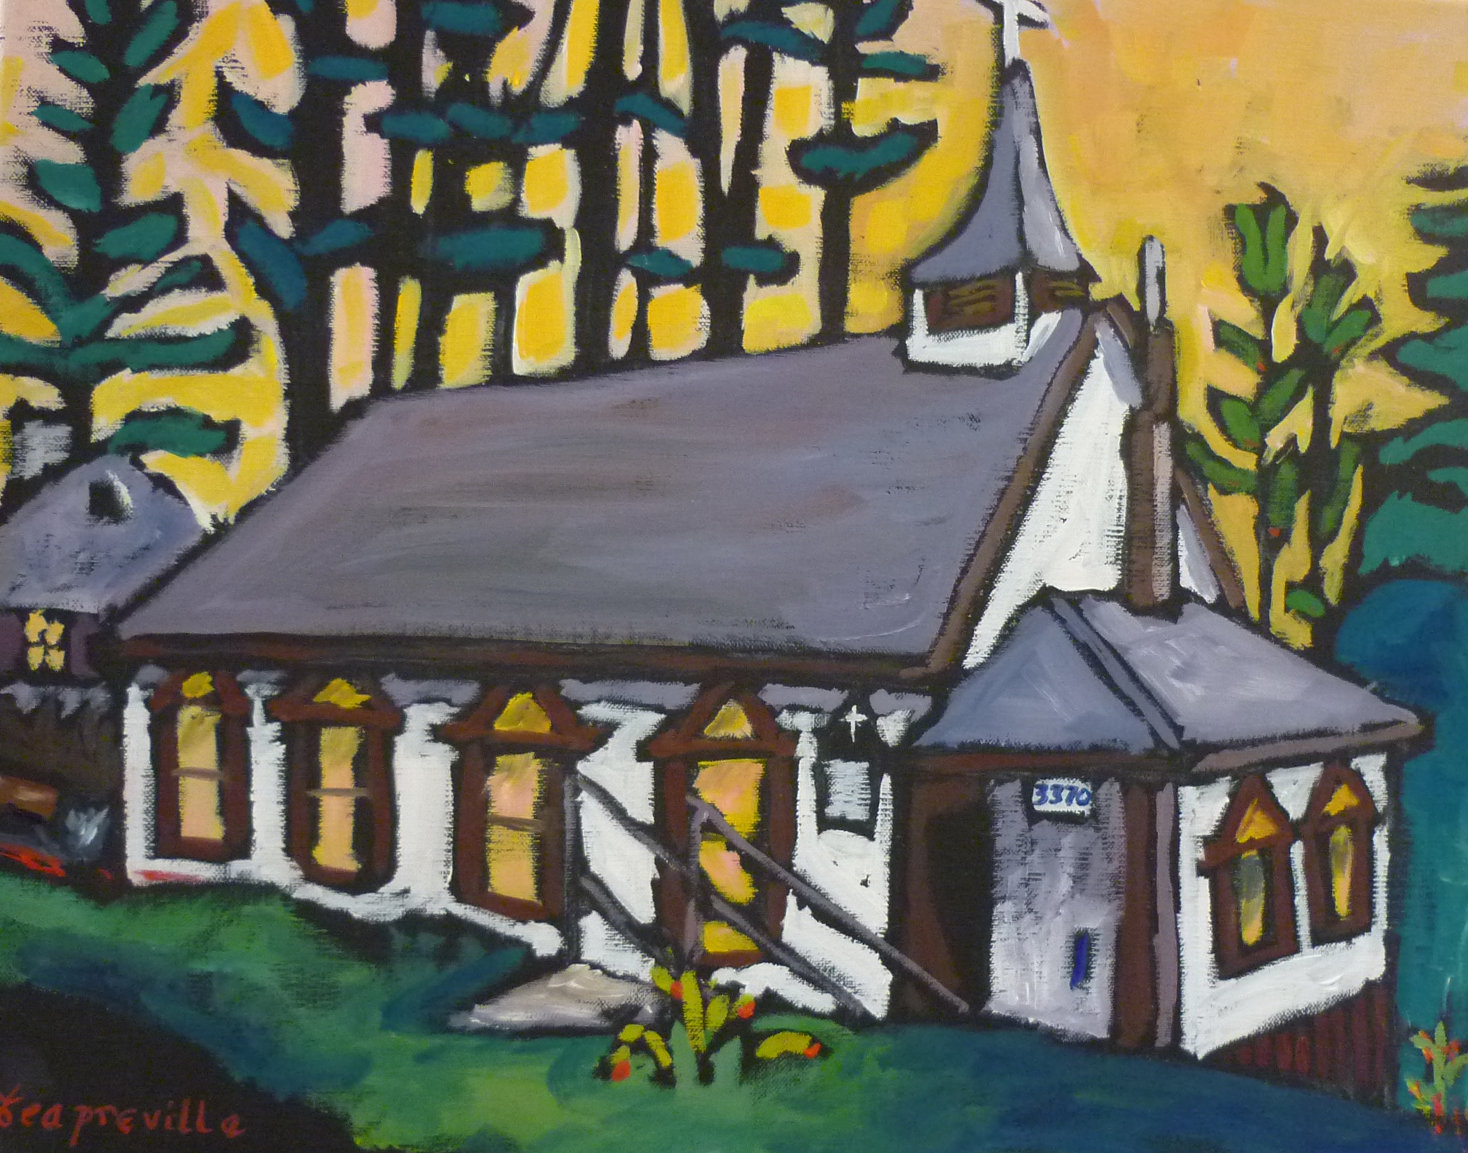 St. Matthew’s Anglican Church, South Slocan, BC by Tea Preville